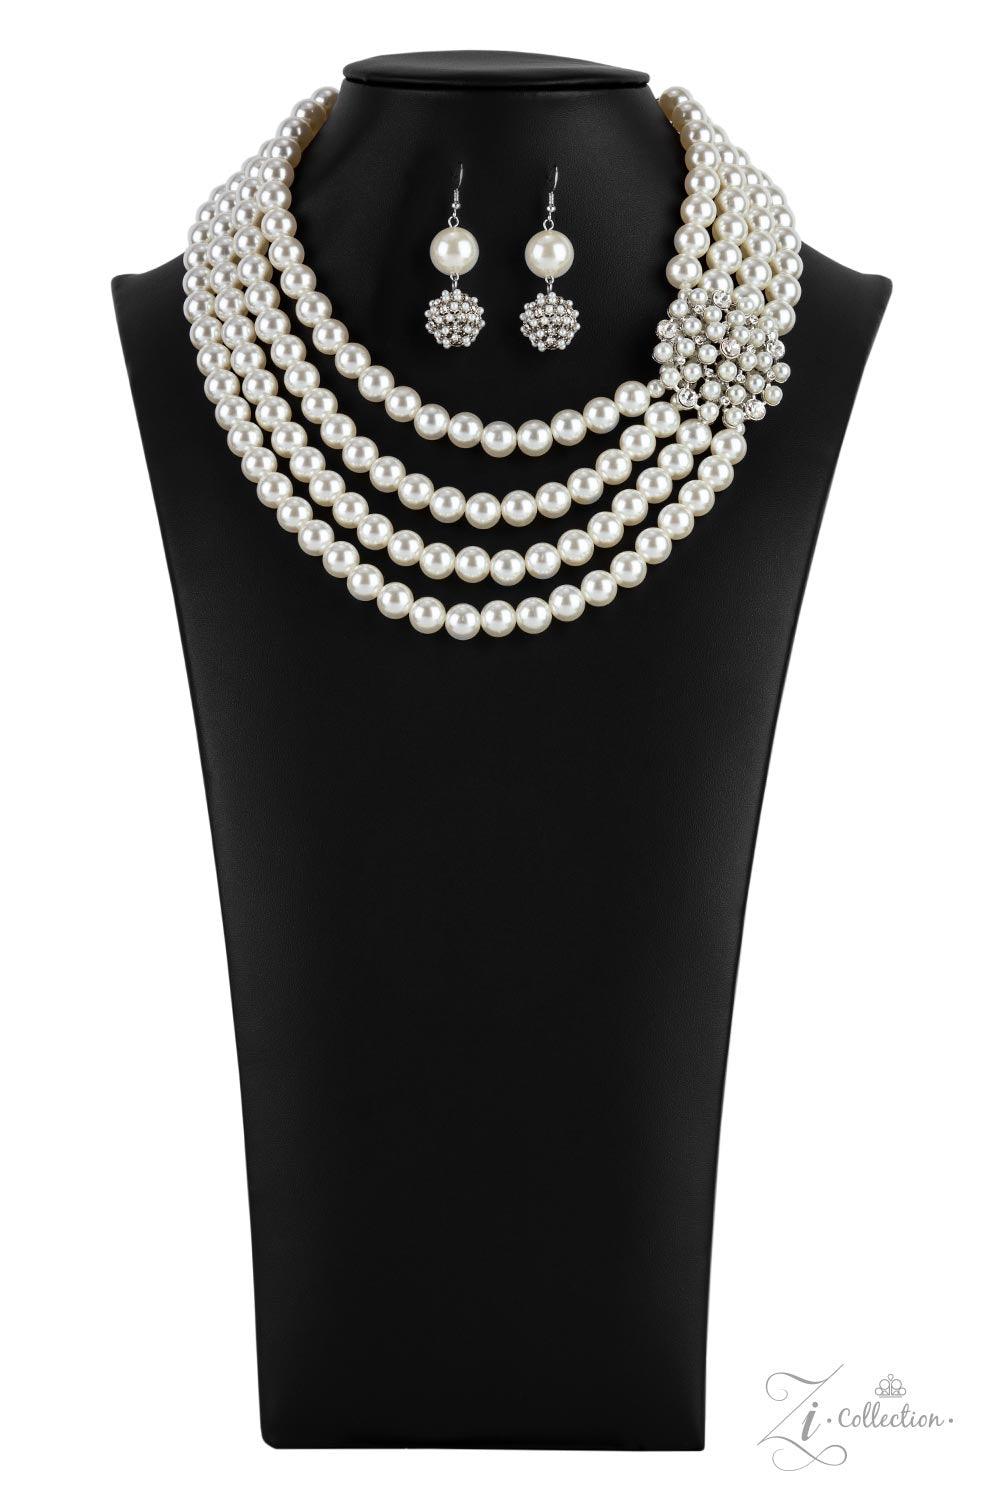 Paparazzi Accessories Romantic Inspired by royalty, an elegant explosion of classic white rhinestones and timeless pearls delicately coalesces into a vintage brooch. The refined ornament delicately holds together strands of oversized pearls, creating roma